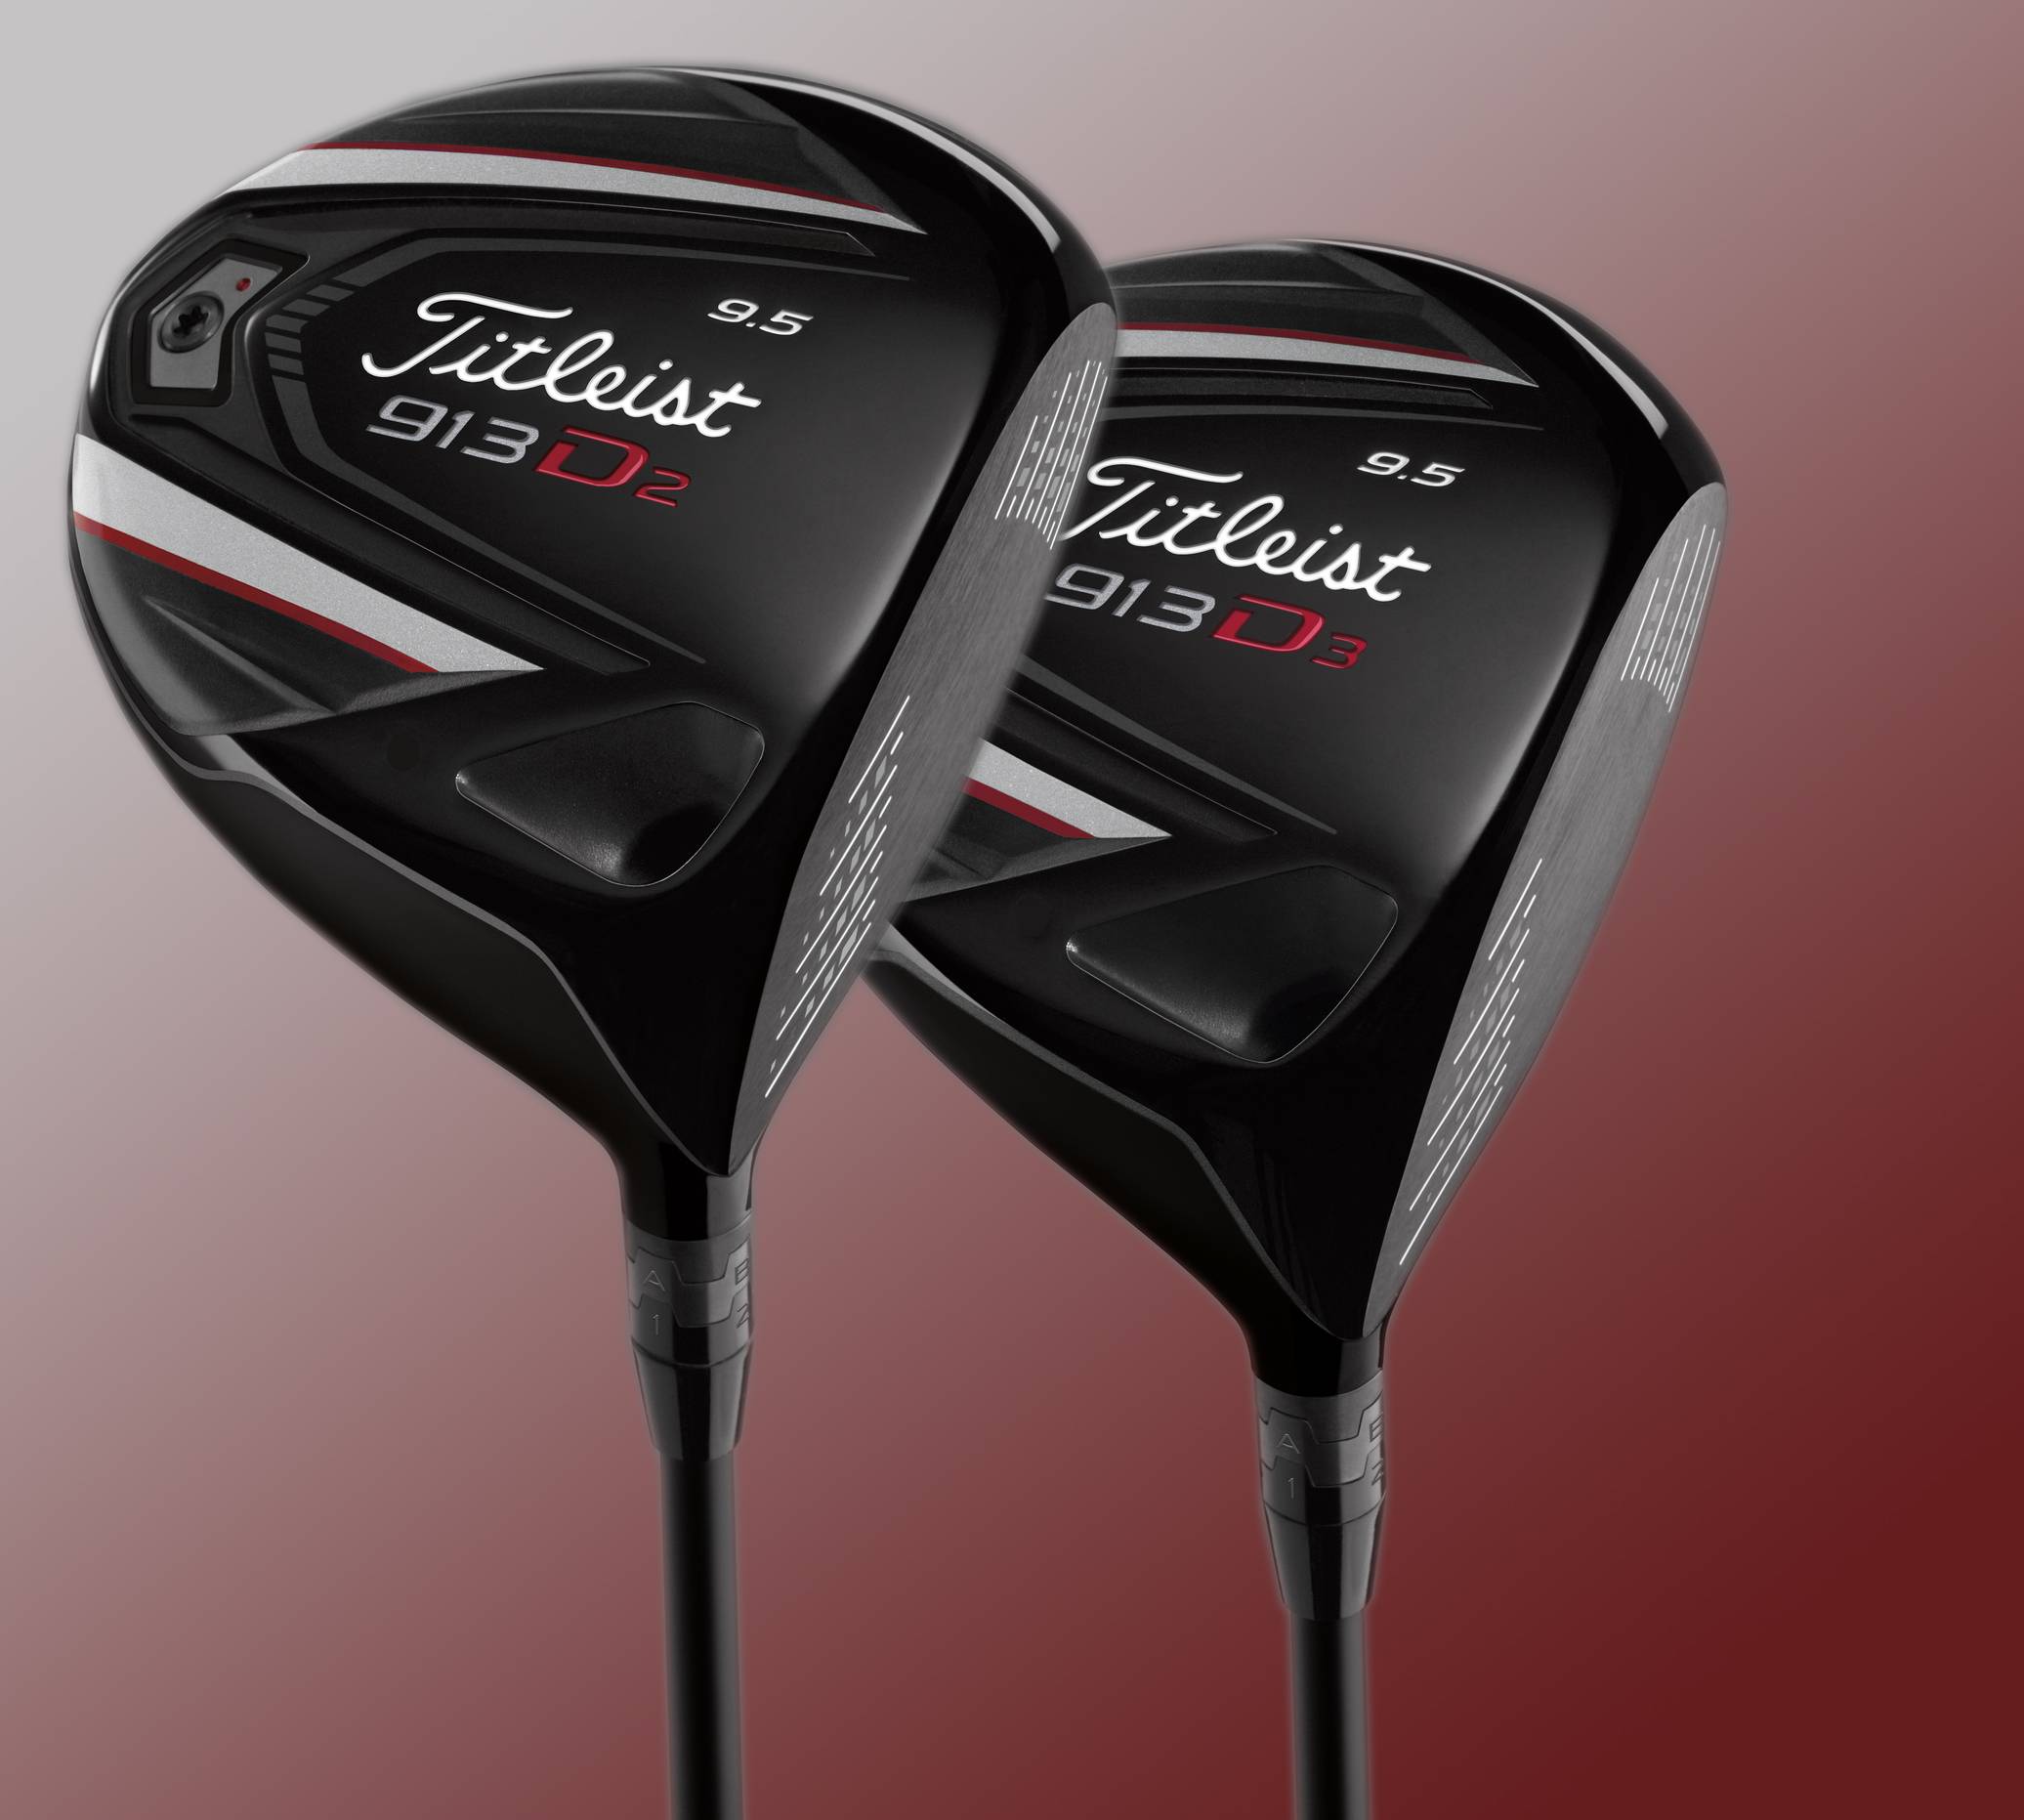 Equipment: Titleist 913 drivers - The Globe and Mail